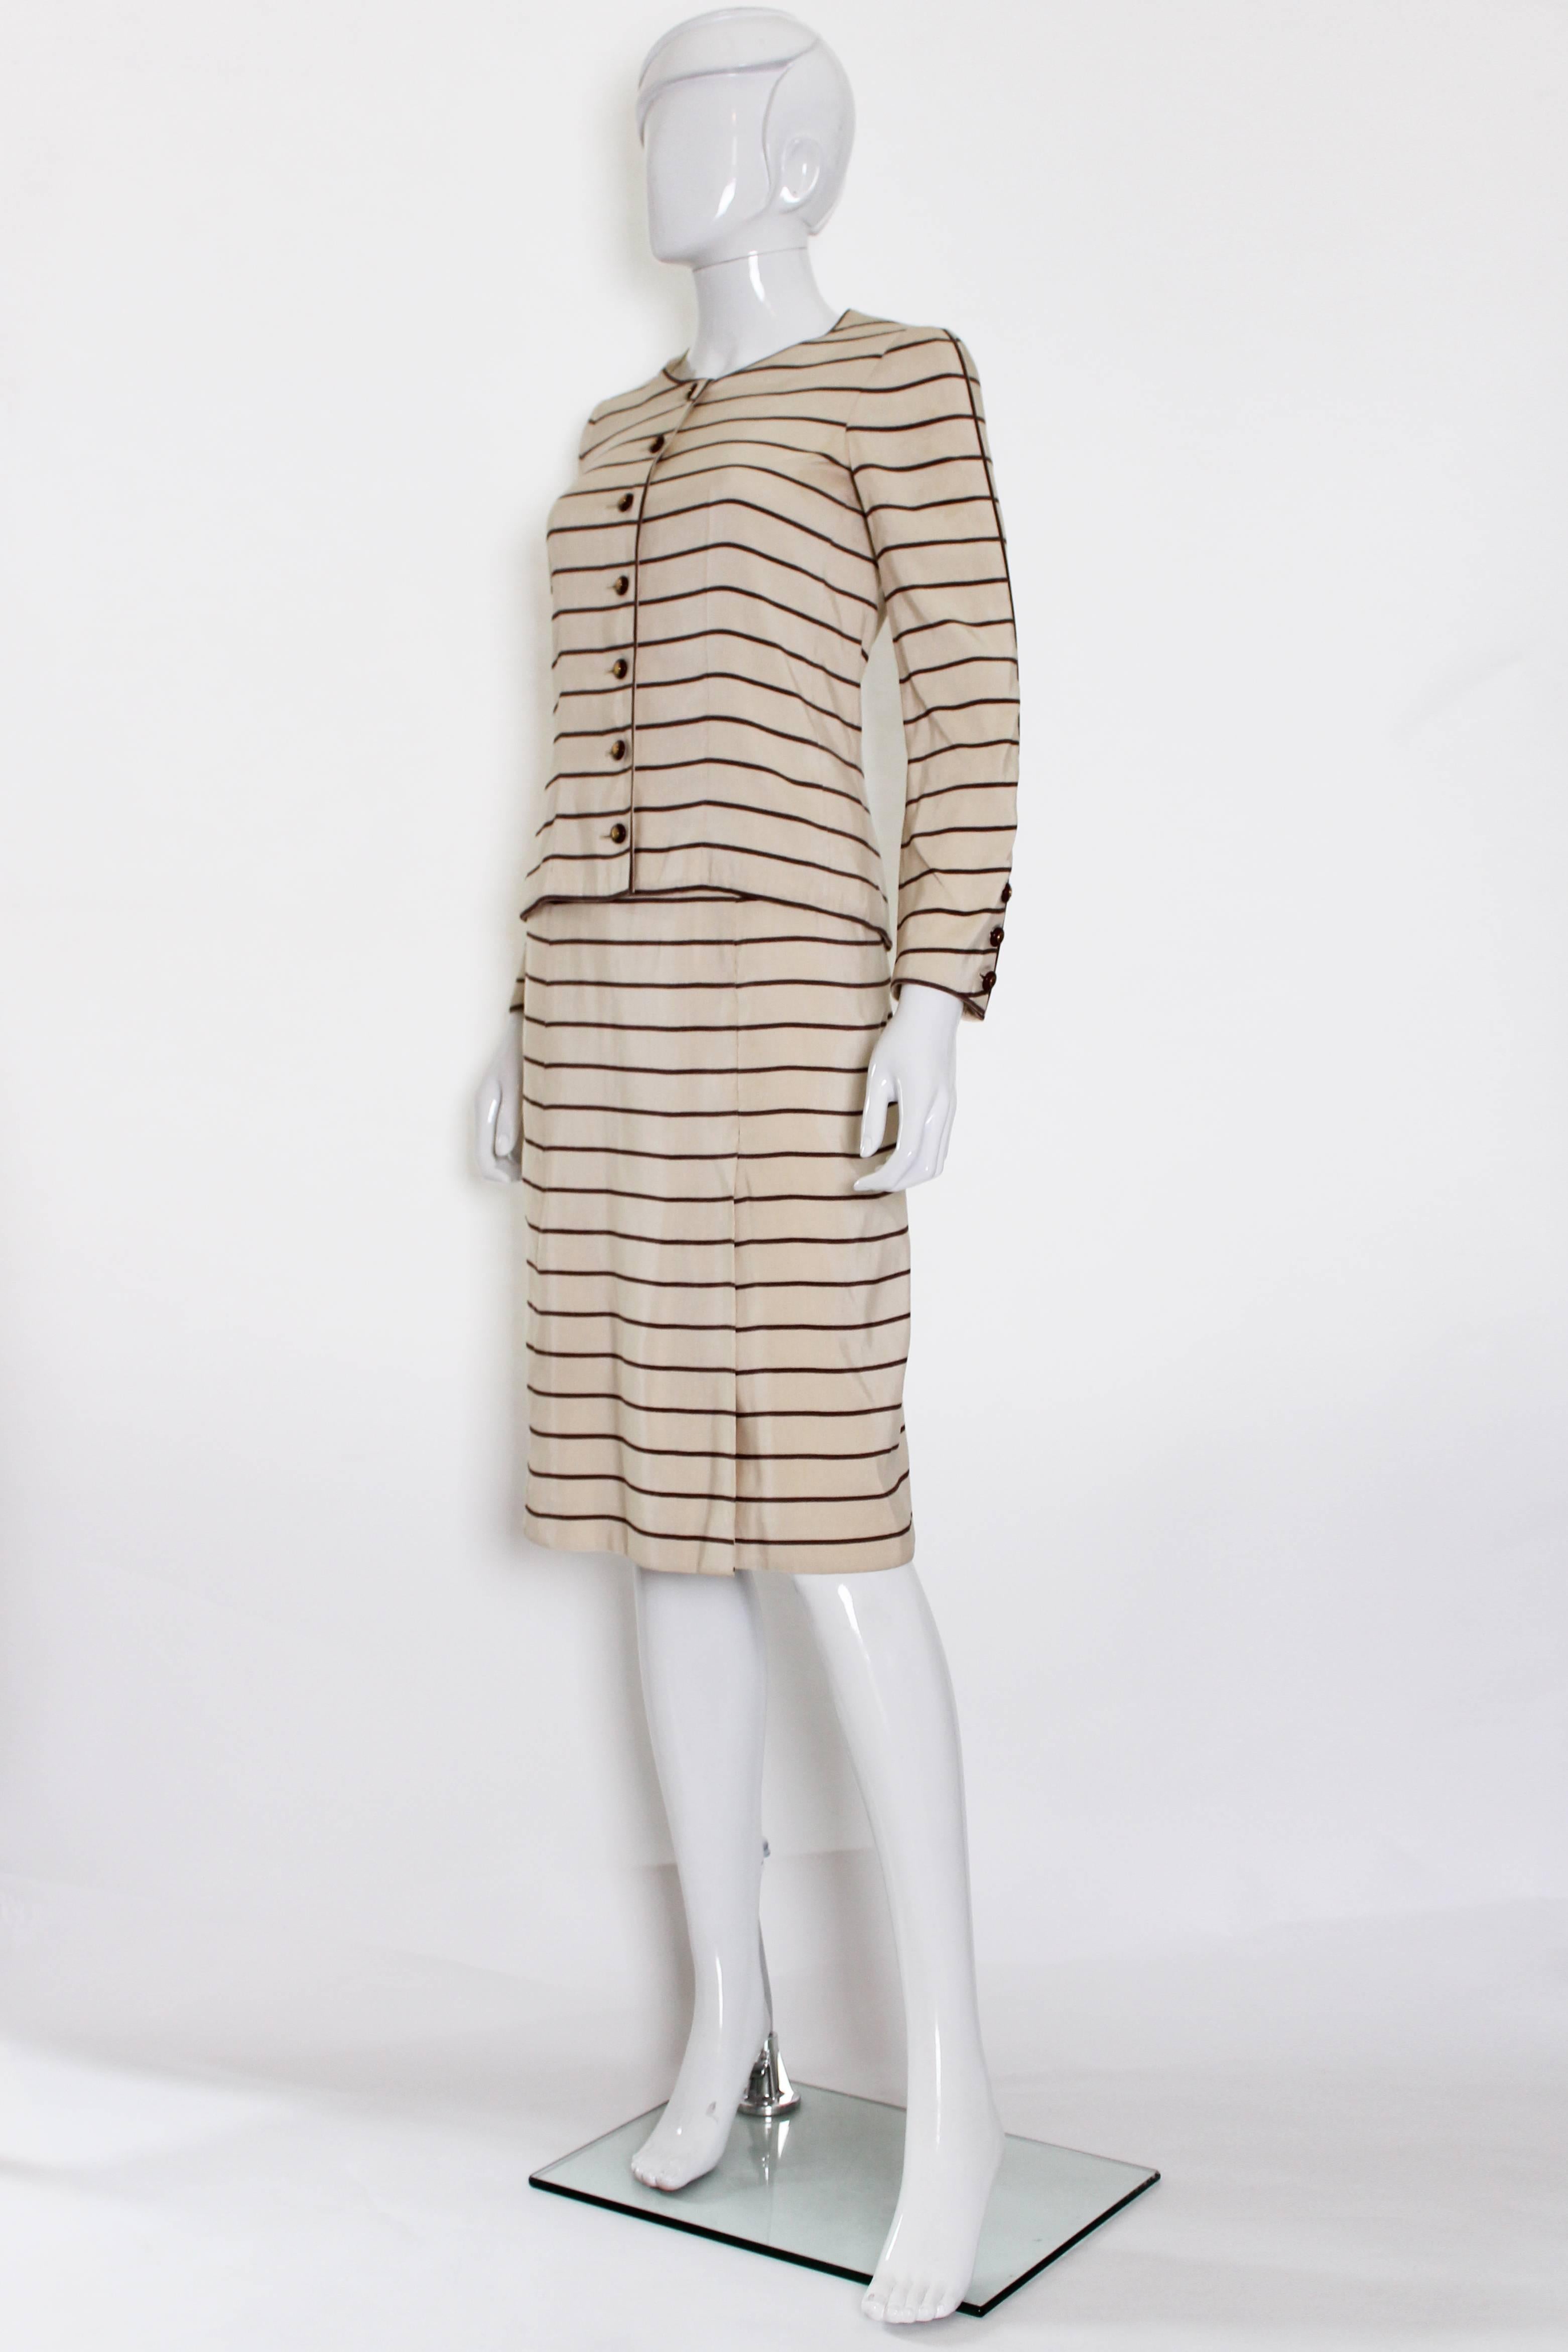 A charming and chic haute couture skirt suit by Chanel.
The suit is made of a cotton/silk mix, taupe stripes on an ivory background.
The suit is lined in silk, the buttons are made of wood, and the jacket has a chain in the hem. The jacket has a